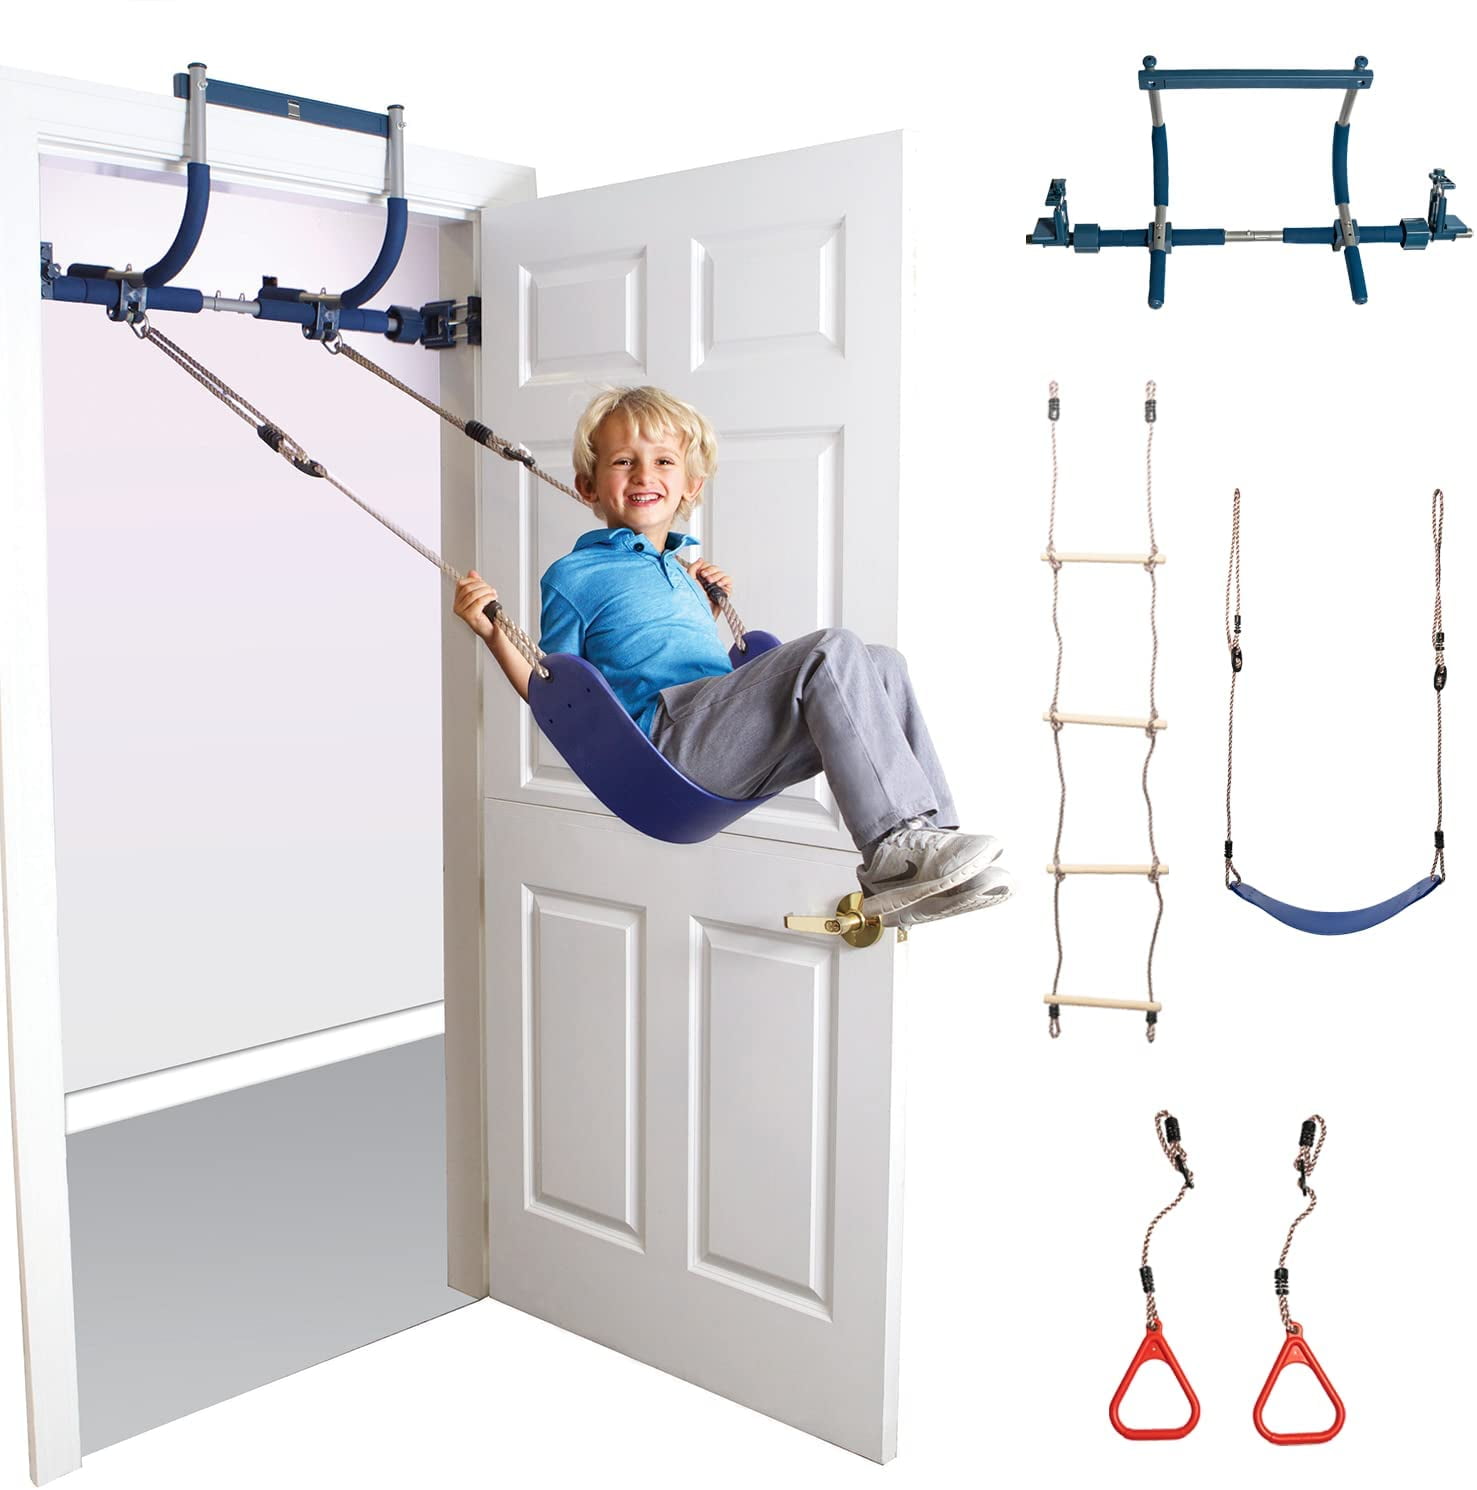 DELUX CAGE TOP PLAY GYM-WITH LADDER,TOYS,SWING 